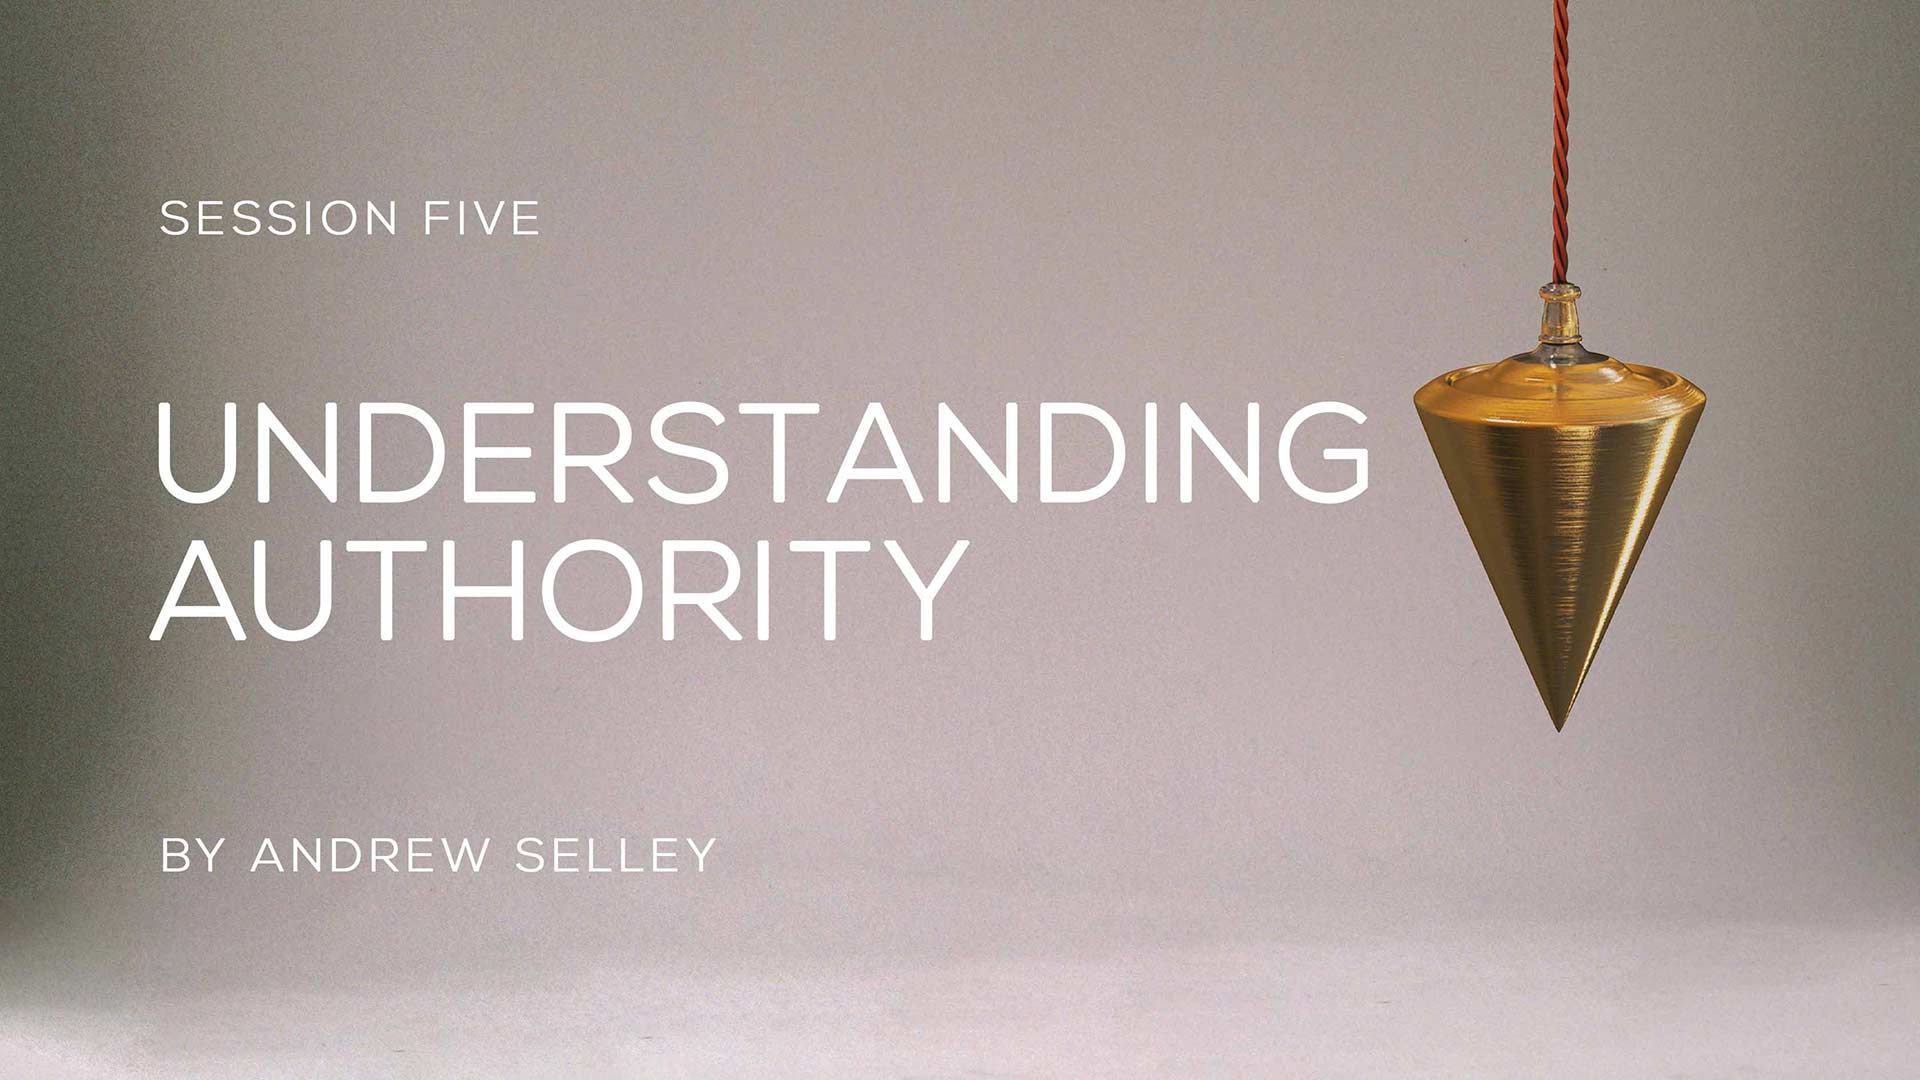 Video image for 'Understanding Authority’ about apostles and elders